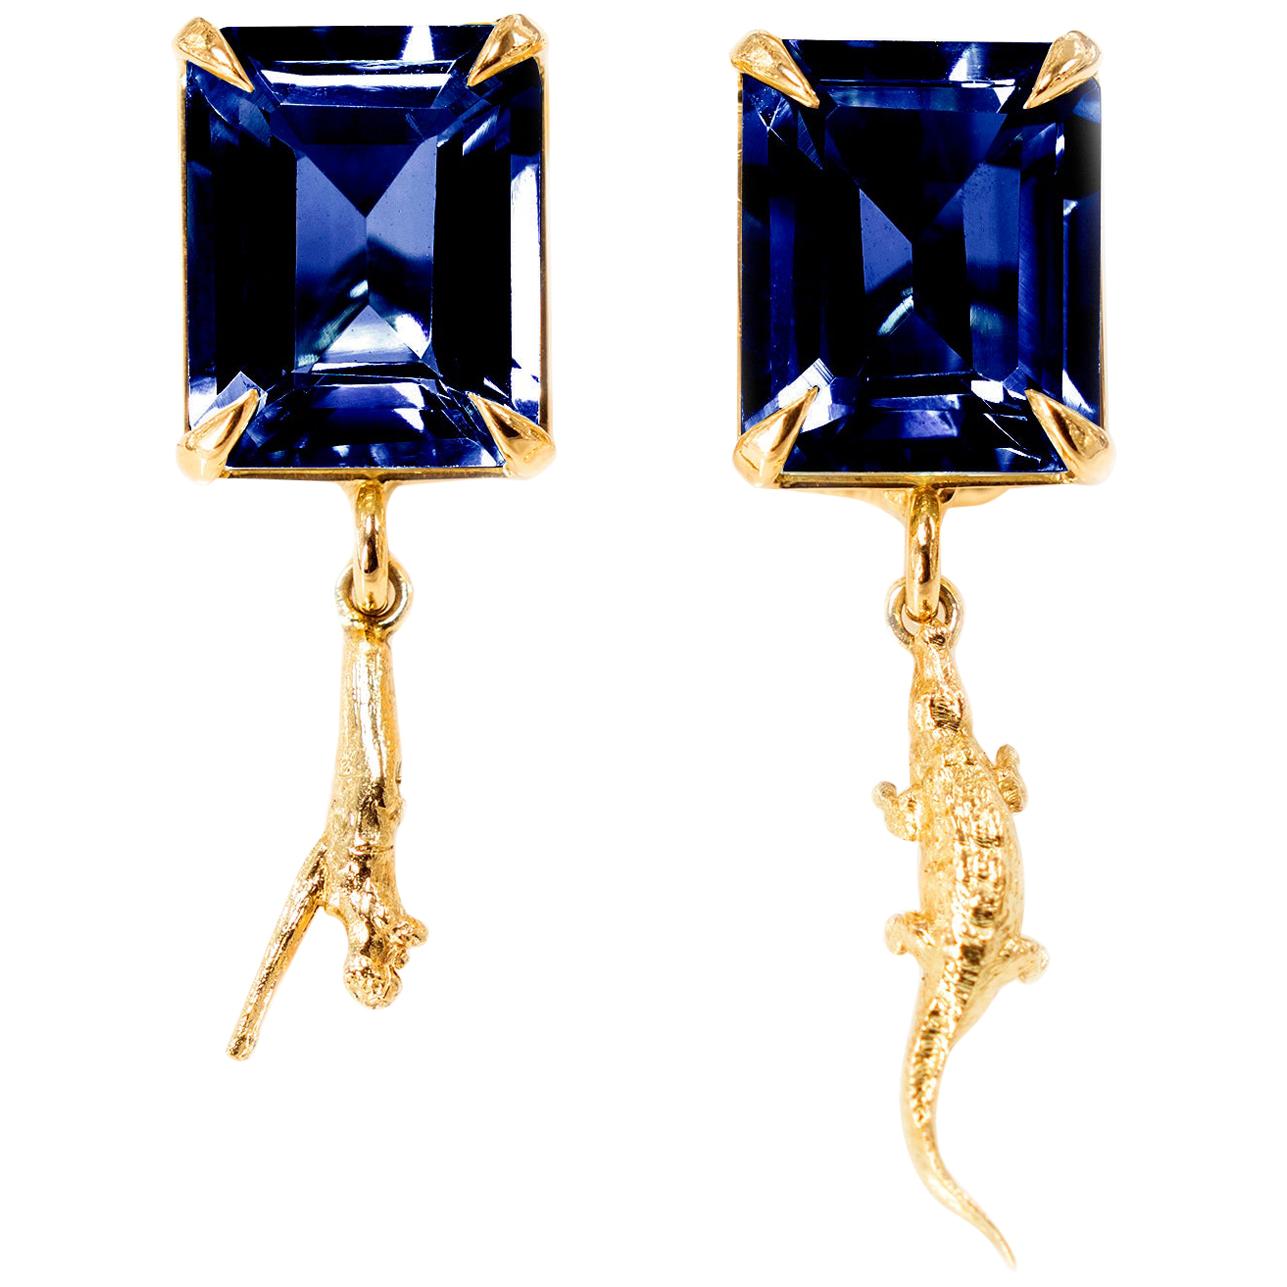 Eighteen Karat Yellow Gold Contemporary Earrings with Sapphires